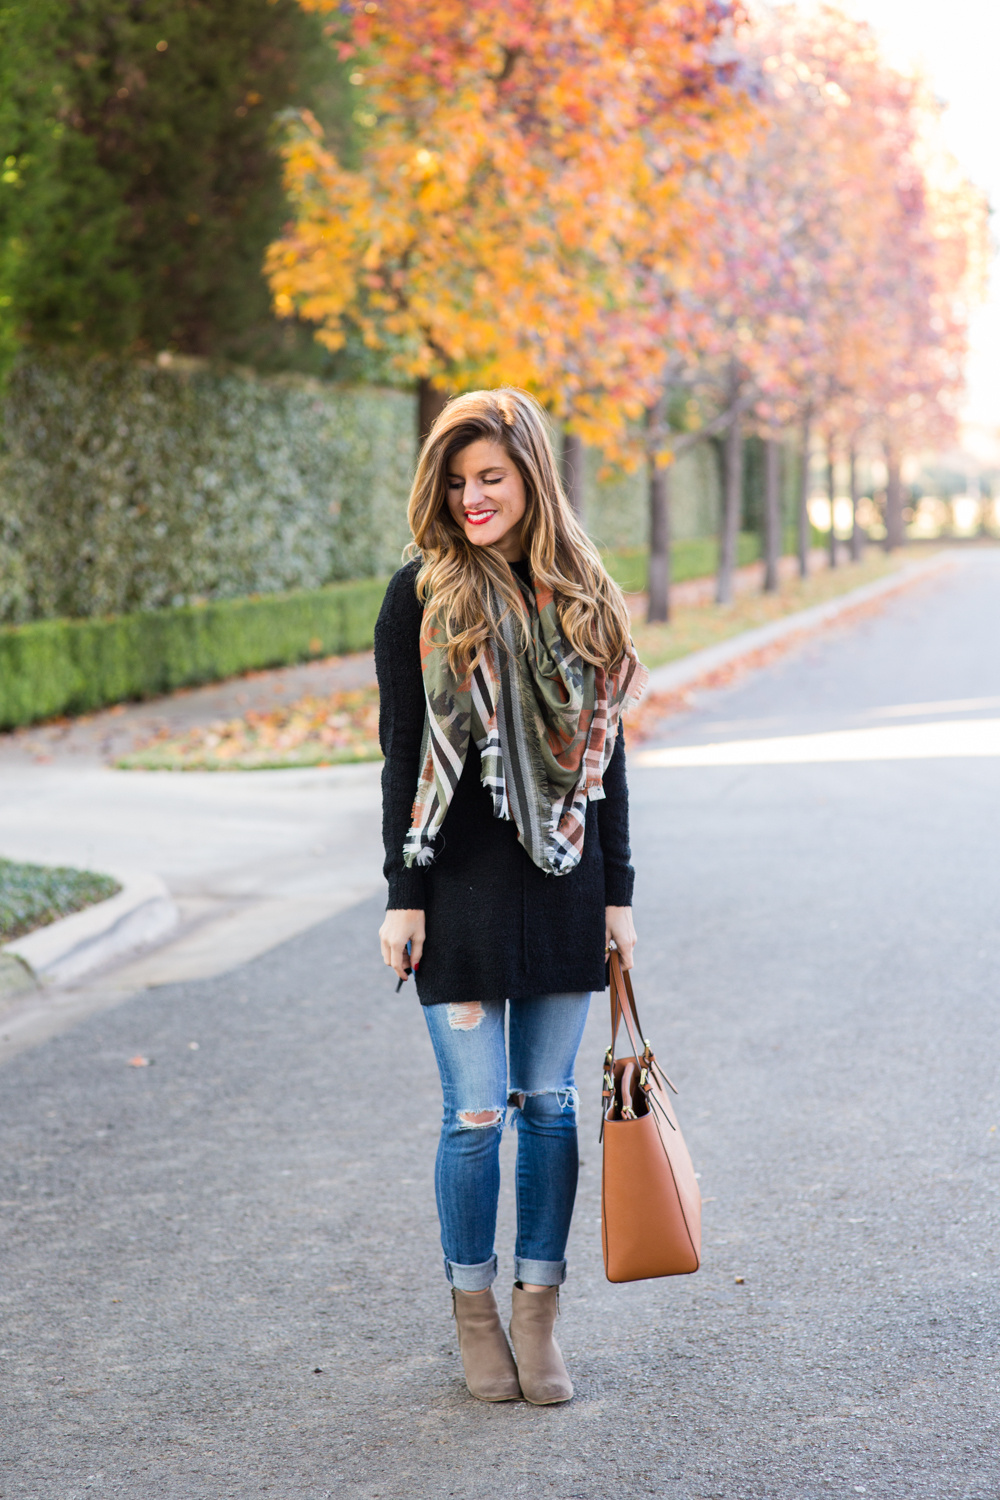 Long black tunic, rolled up skinny jeans, ankle booties, casual outfit, running errands outfit, neutral fall outfit, brightontheday 